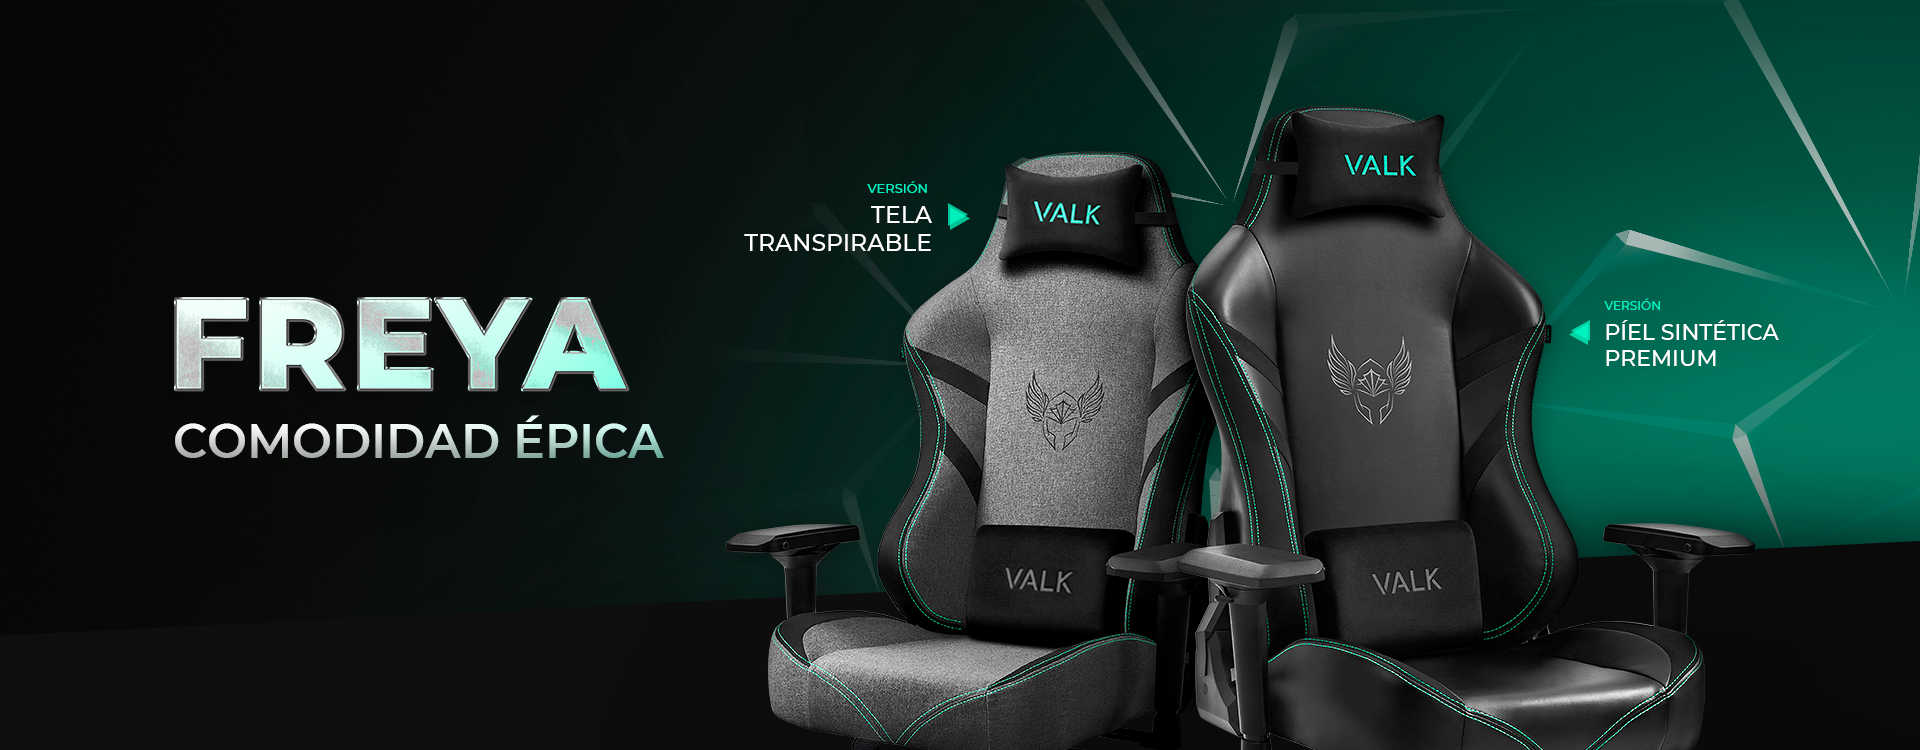 VALK FREYA: the revolution in gaming chairs comes from Spain